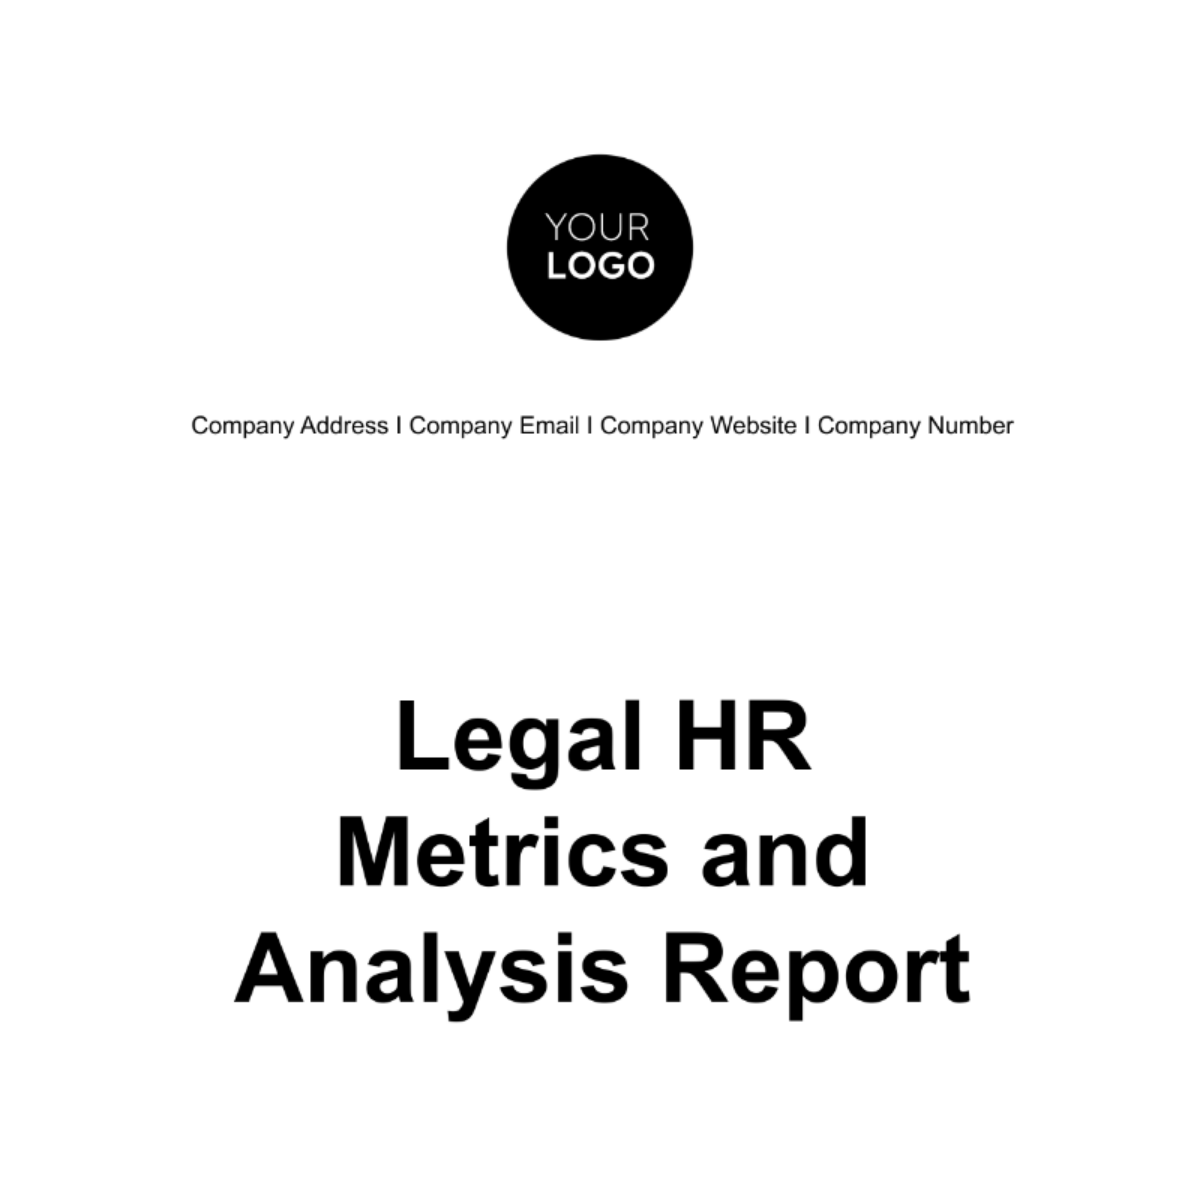 Free Legal HR Metrics and Analysis Report Template